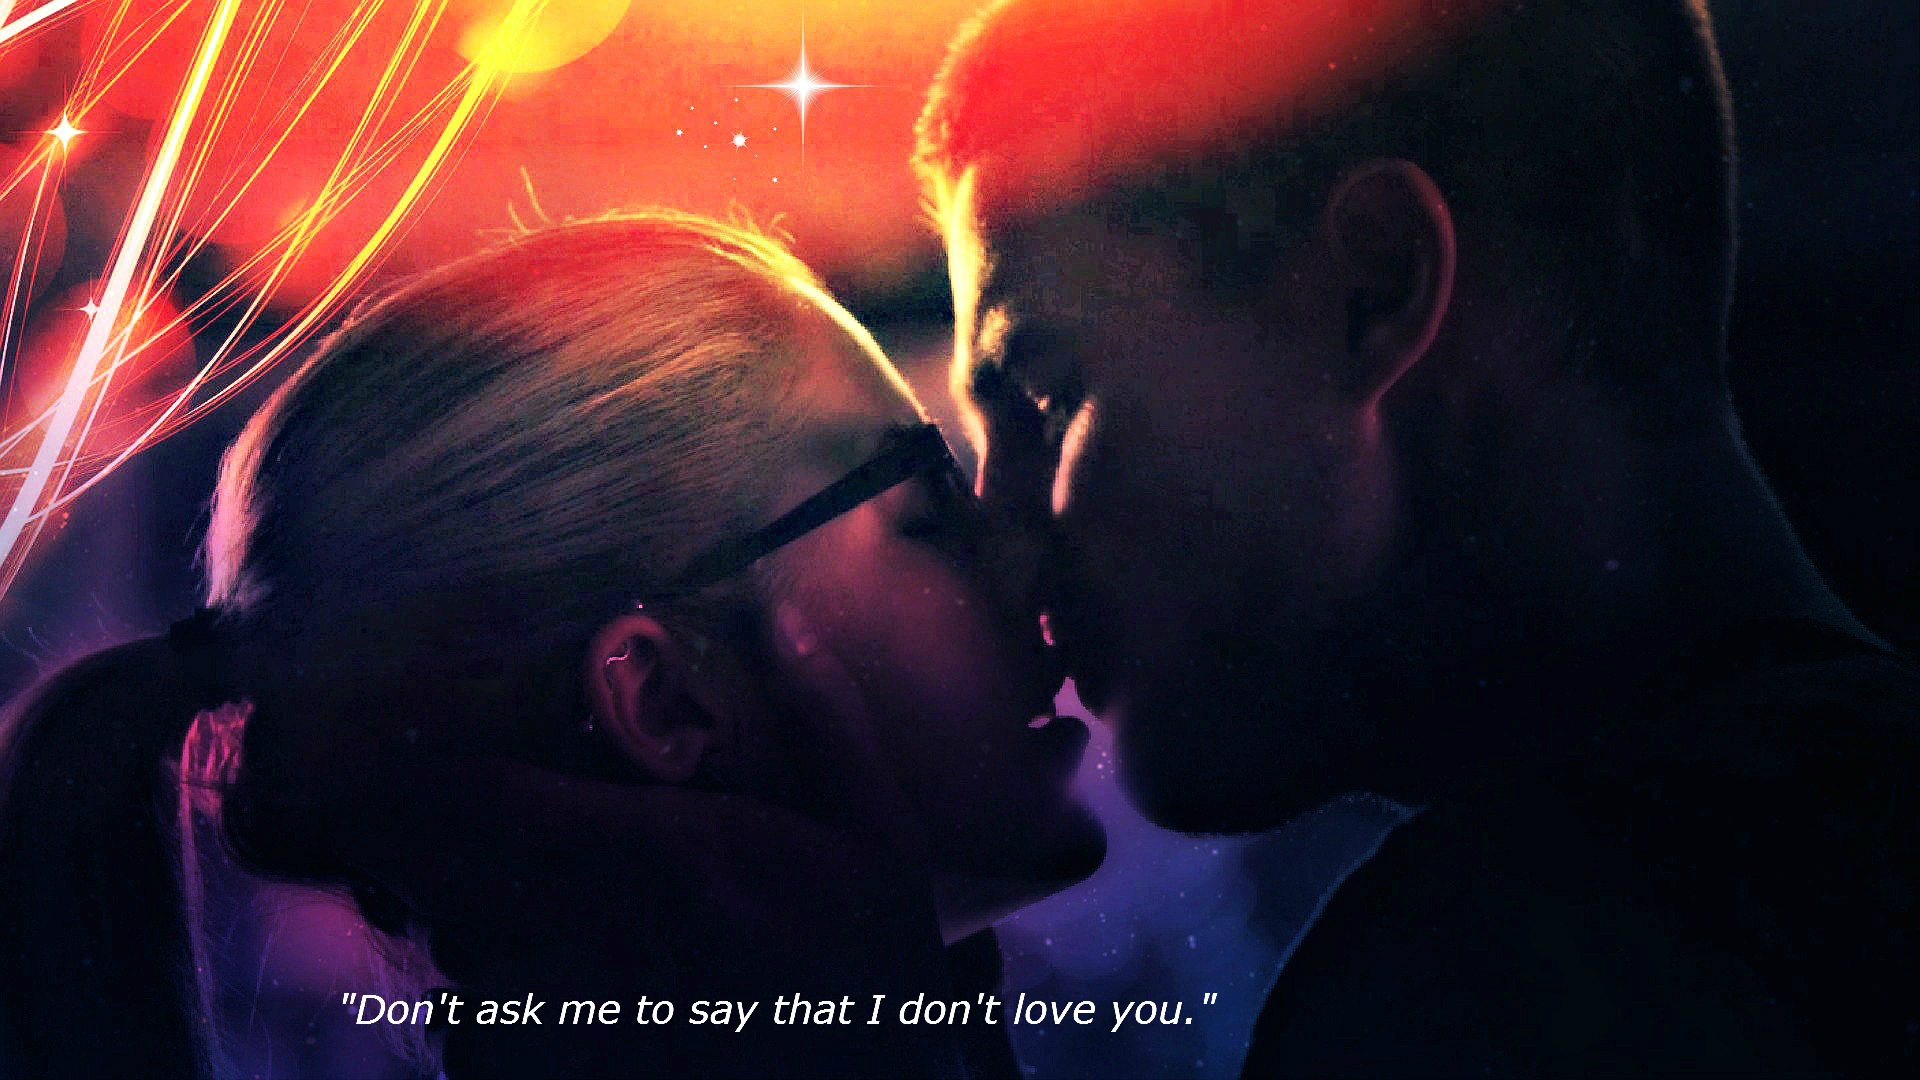 Oliver And Felicity Wallpaper